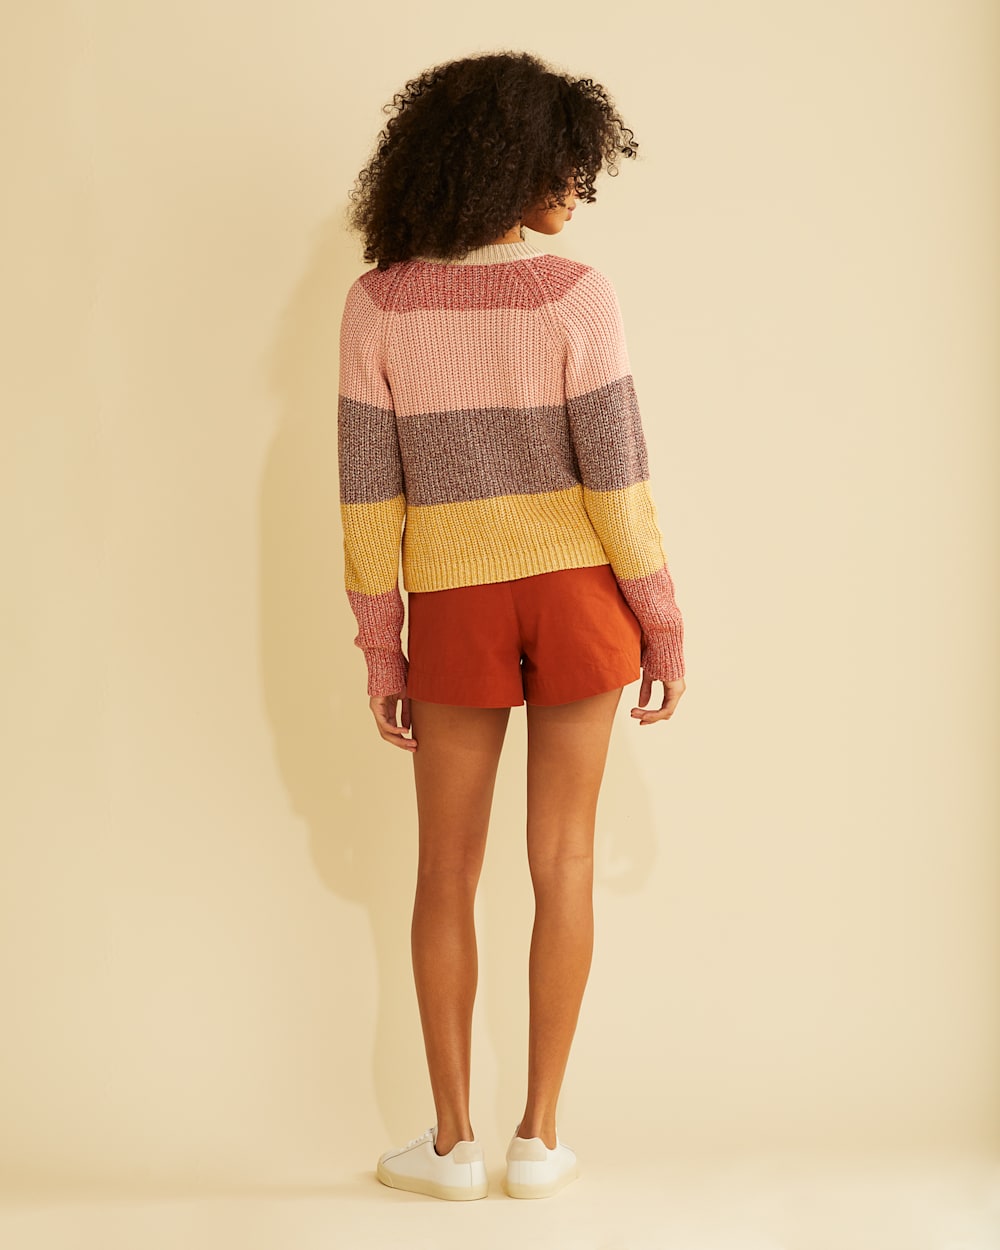 ALTERNATE VIEW OF WOMEN'S MAE STRIPED COTTON CARDIGAN IN SUNSET MULTI image number 3